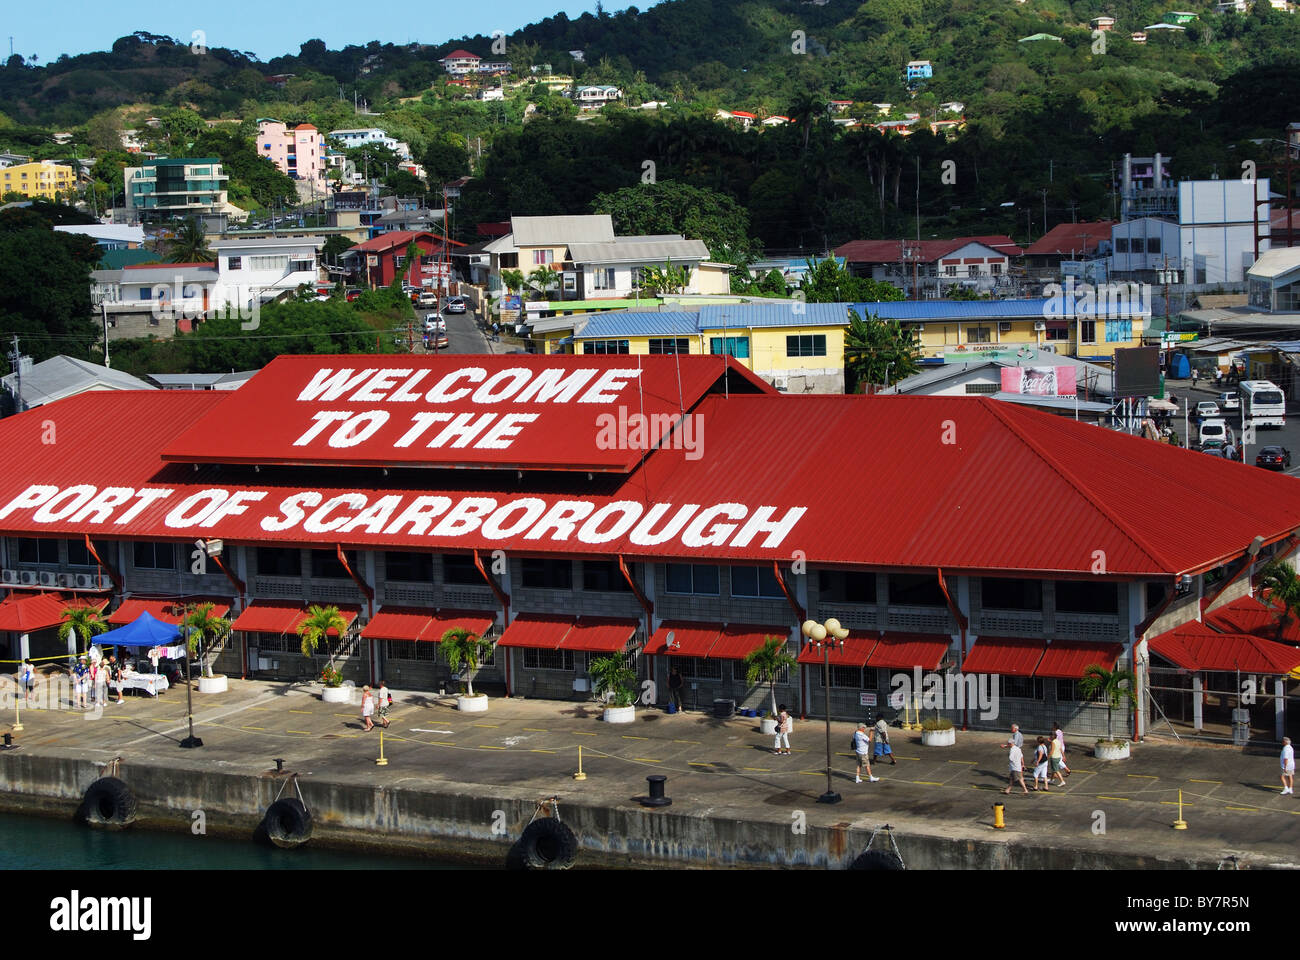 Port of Scarborough harbour building and elevated view of town,  Scarborough, Tobago, Trinidad and Tobago, Caribbean Stock Photo - Alamy